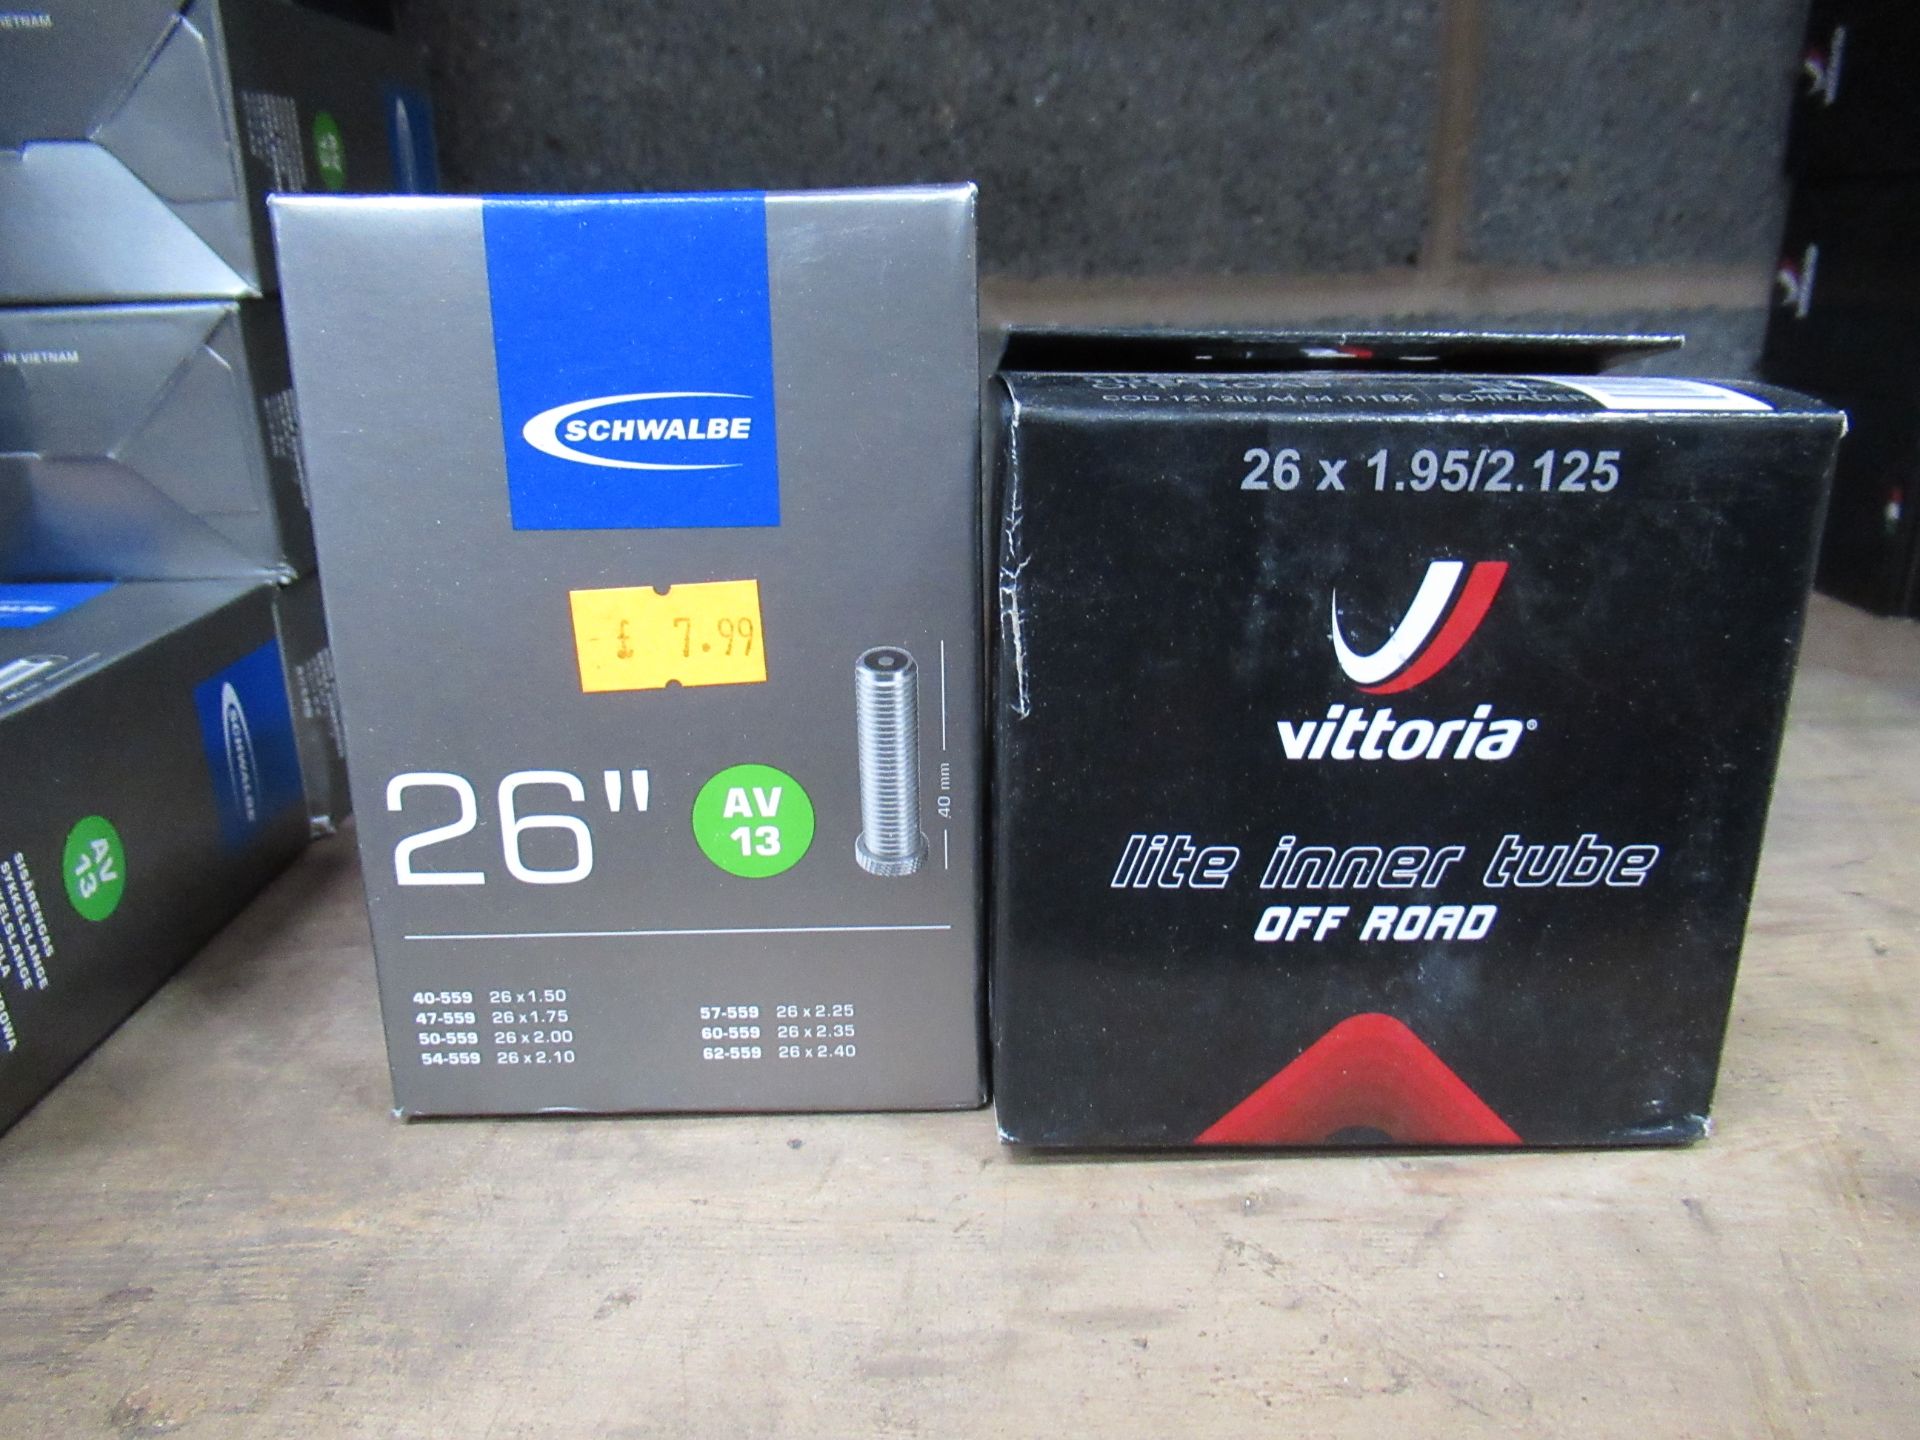 21 x Schwalbe AV13 26x1.50-2.50 and 10 x Vittoria Lite Off road 26x1.95x2.125 inner tubes (total RRP - Image 2 of 2